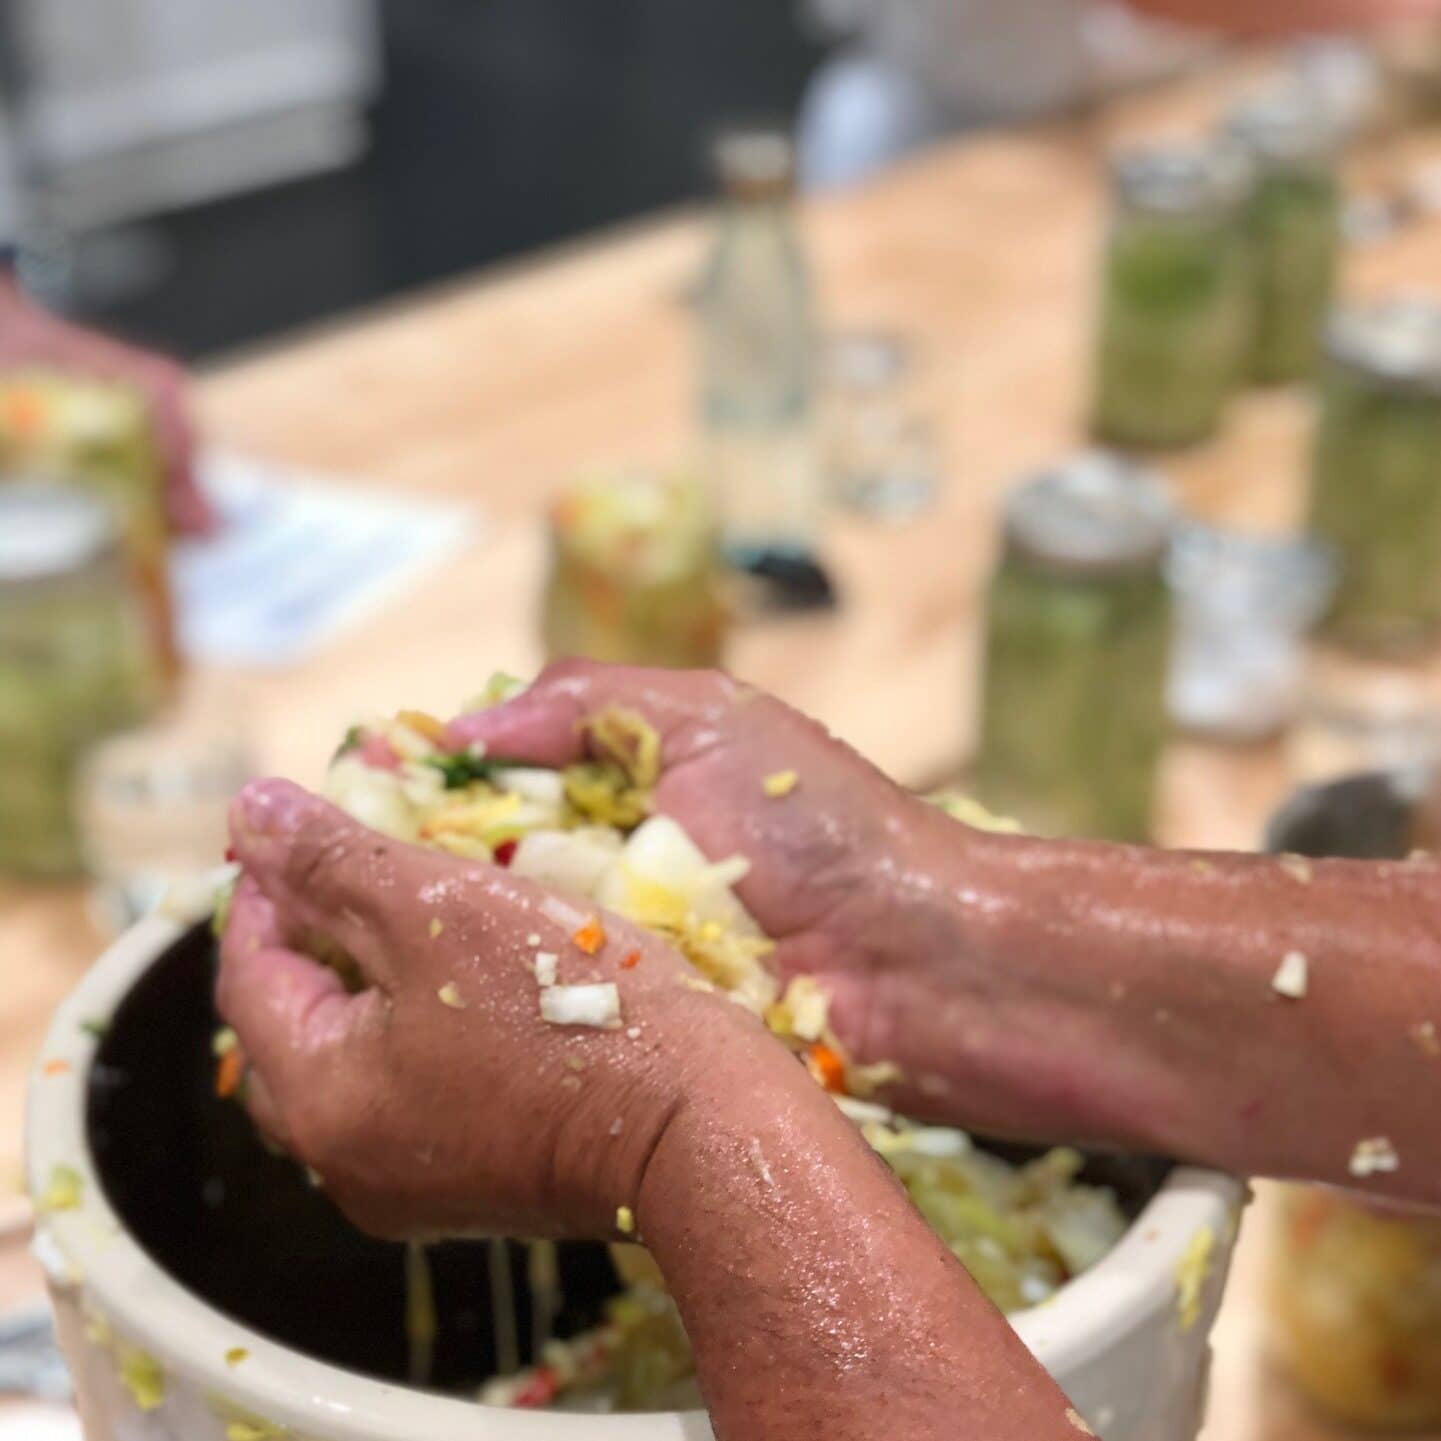 Hands-on Fermentation Education with Community Cultures